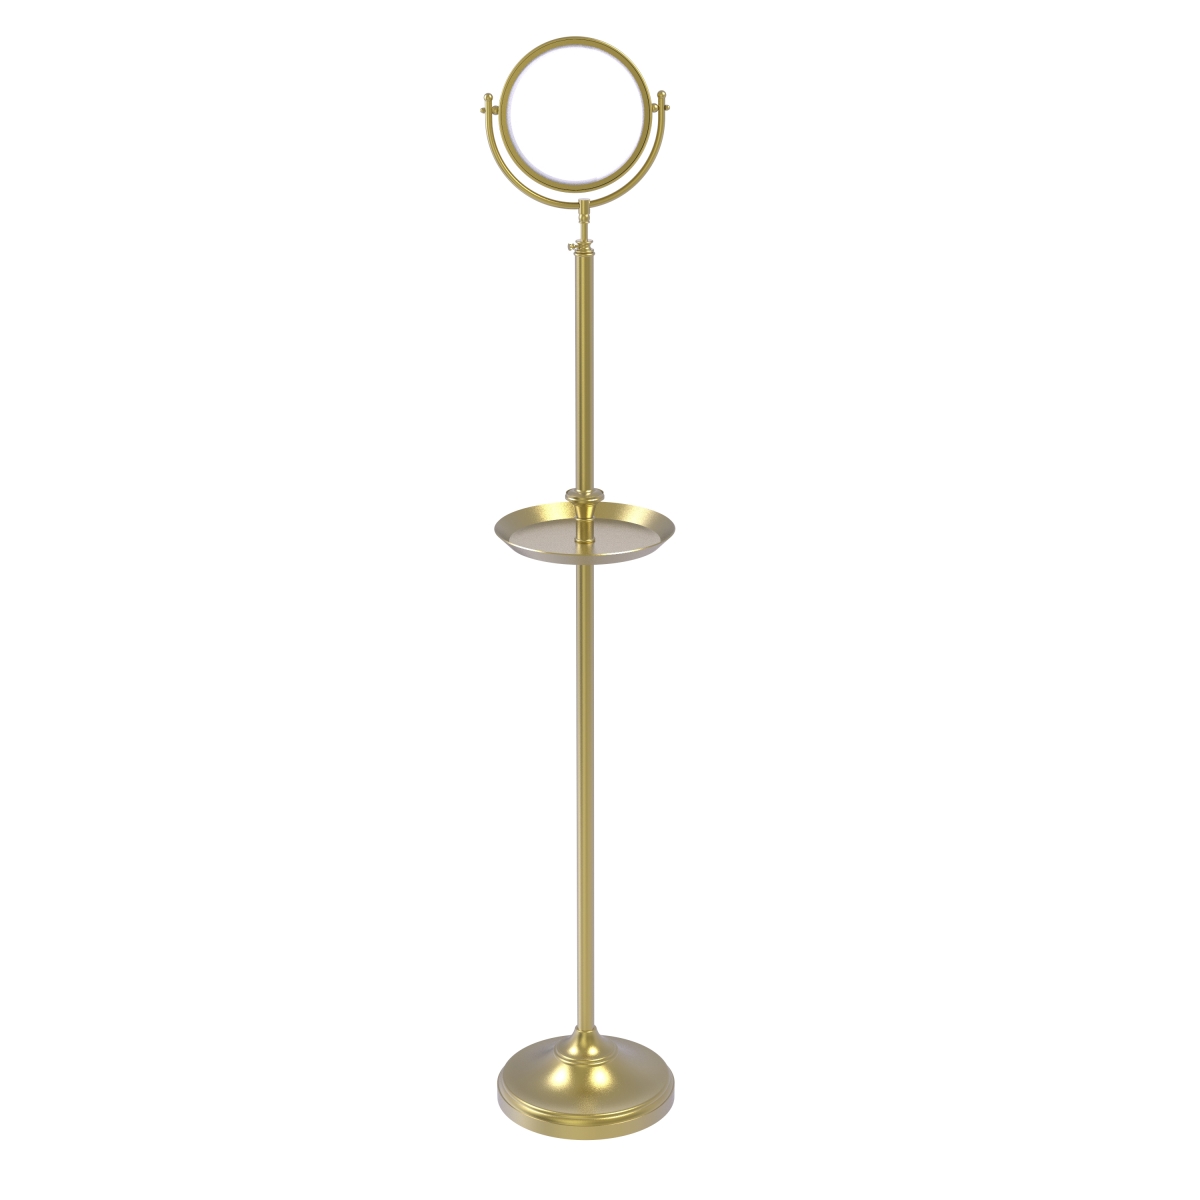 Allied Brass DMF-3-3X-SBR Floor Standing Make-Up Mirror 8 in. dia. with 3X Magnification & Shaving Tray, Satin Brass